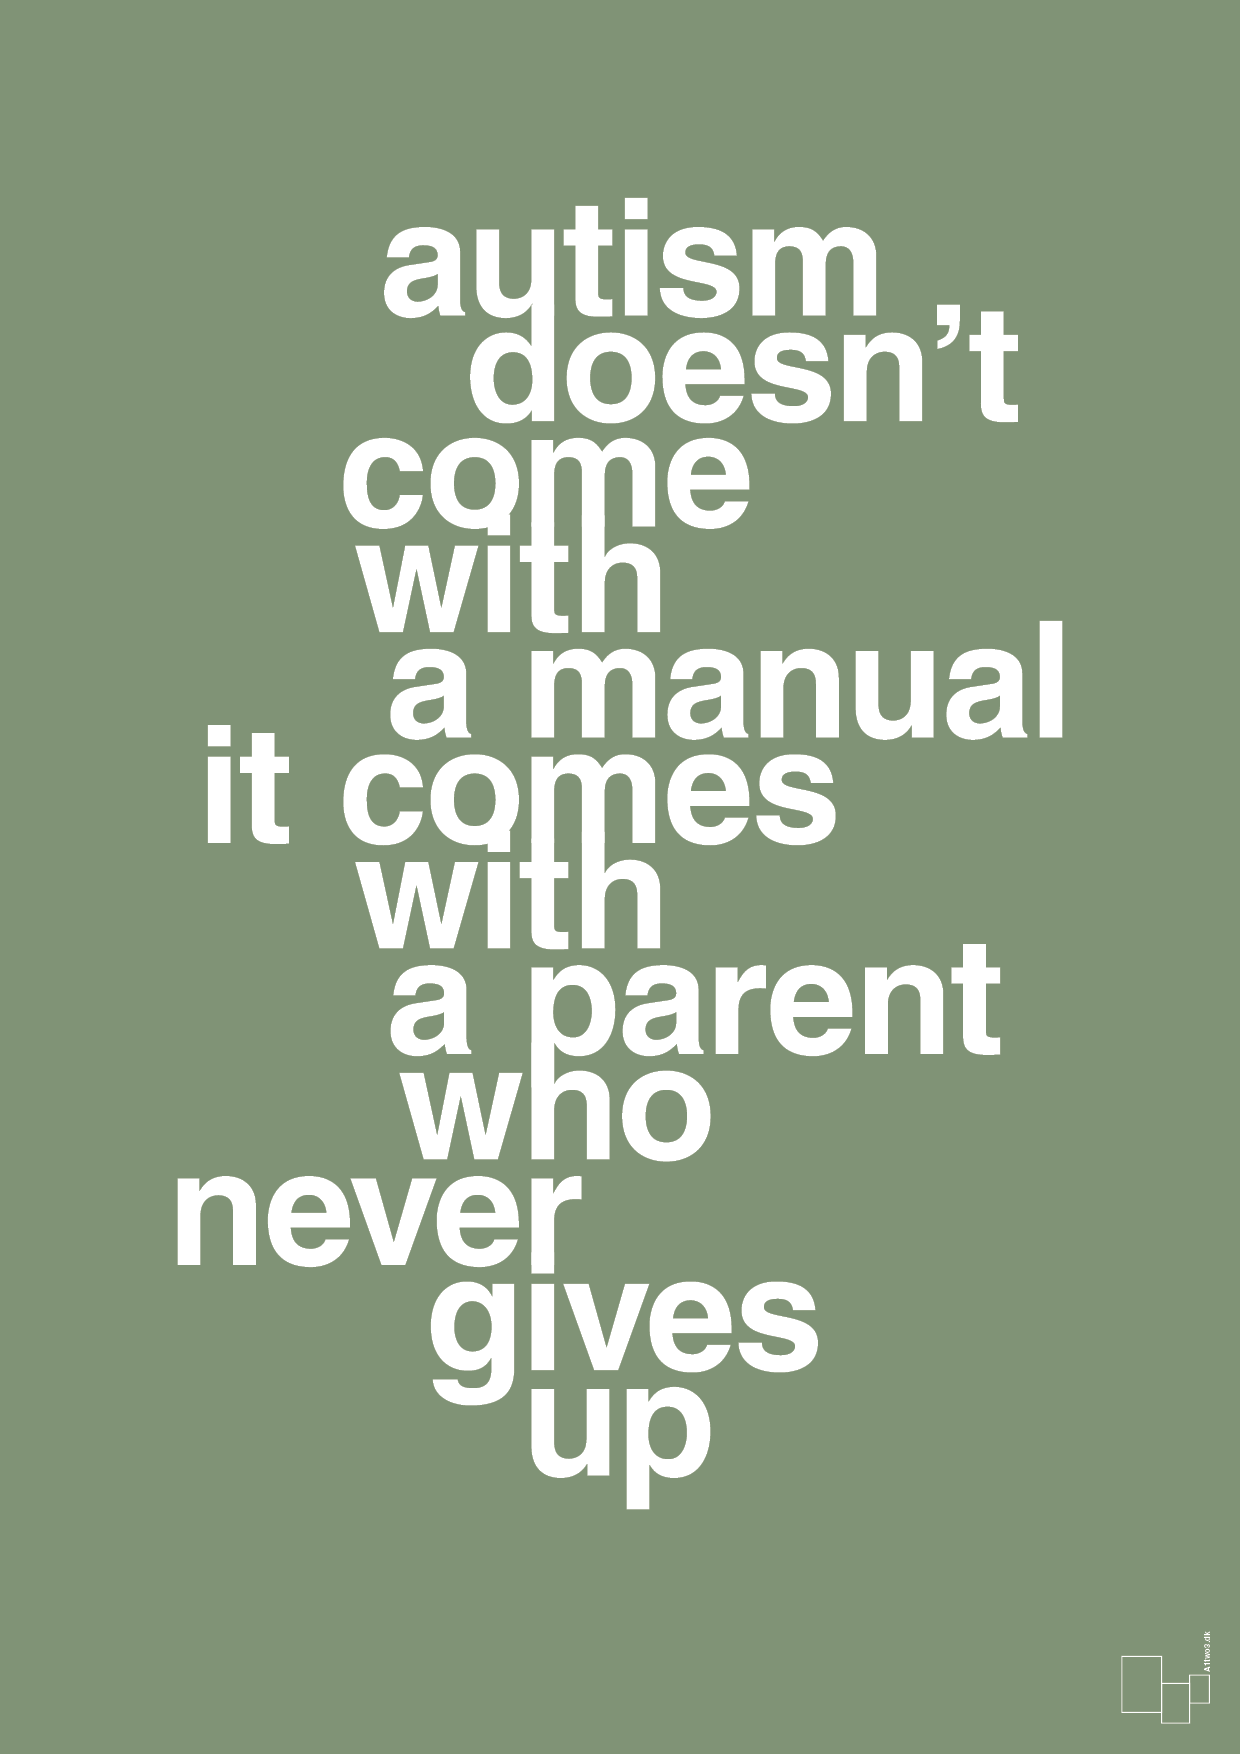 autism doesnt come with a manual it comes with a parent who never gives up - Plakat med Samfund i Jade